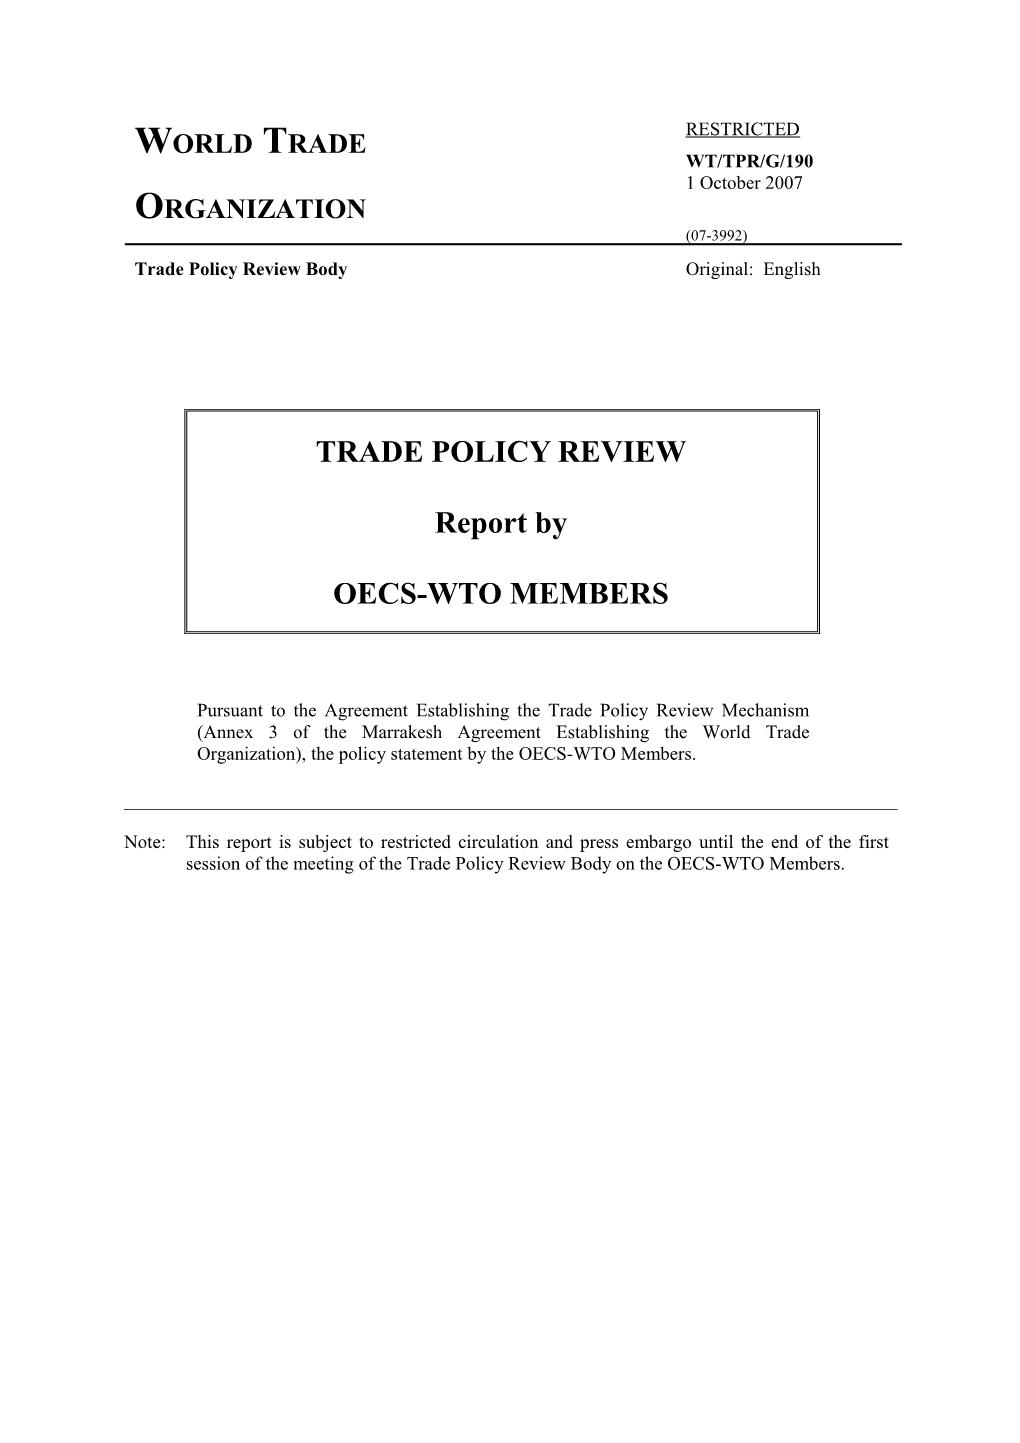 3.Trade Policy and Institutional Framework10